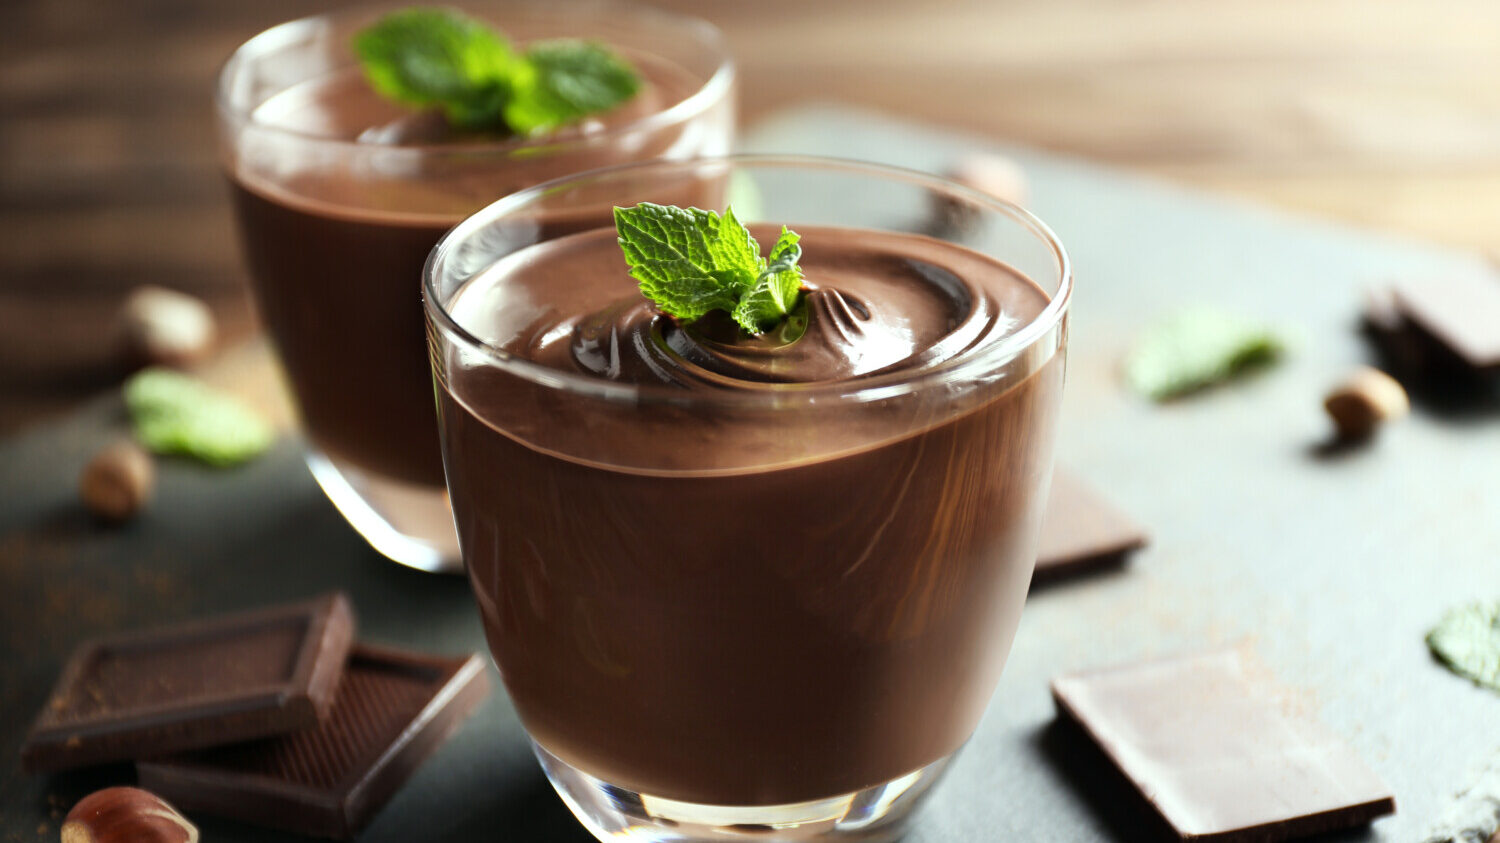 photo of chocolate mousse served in glass cup with mint garnish